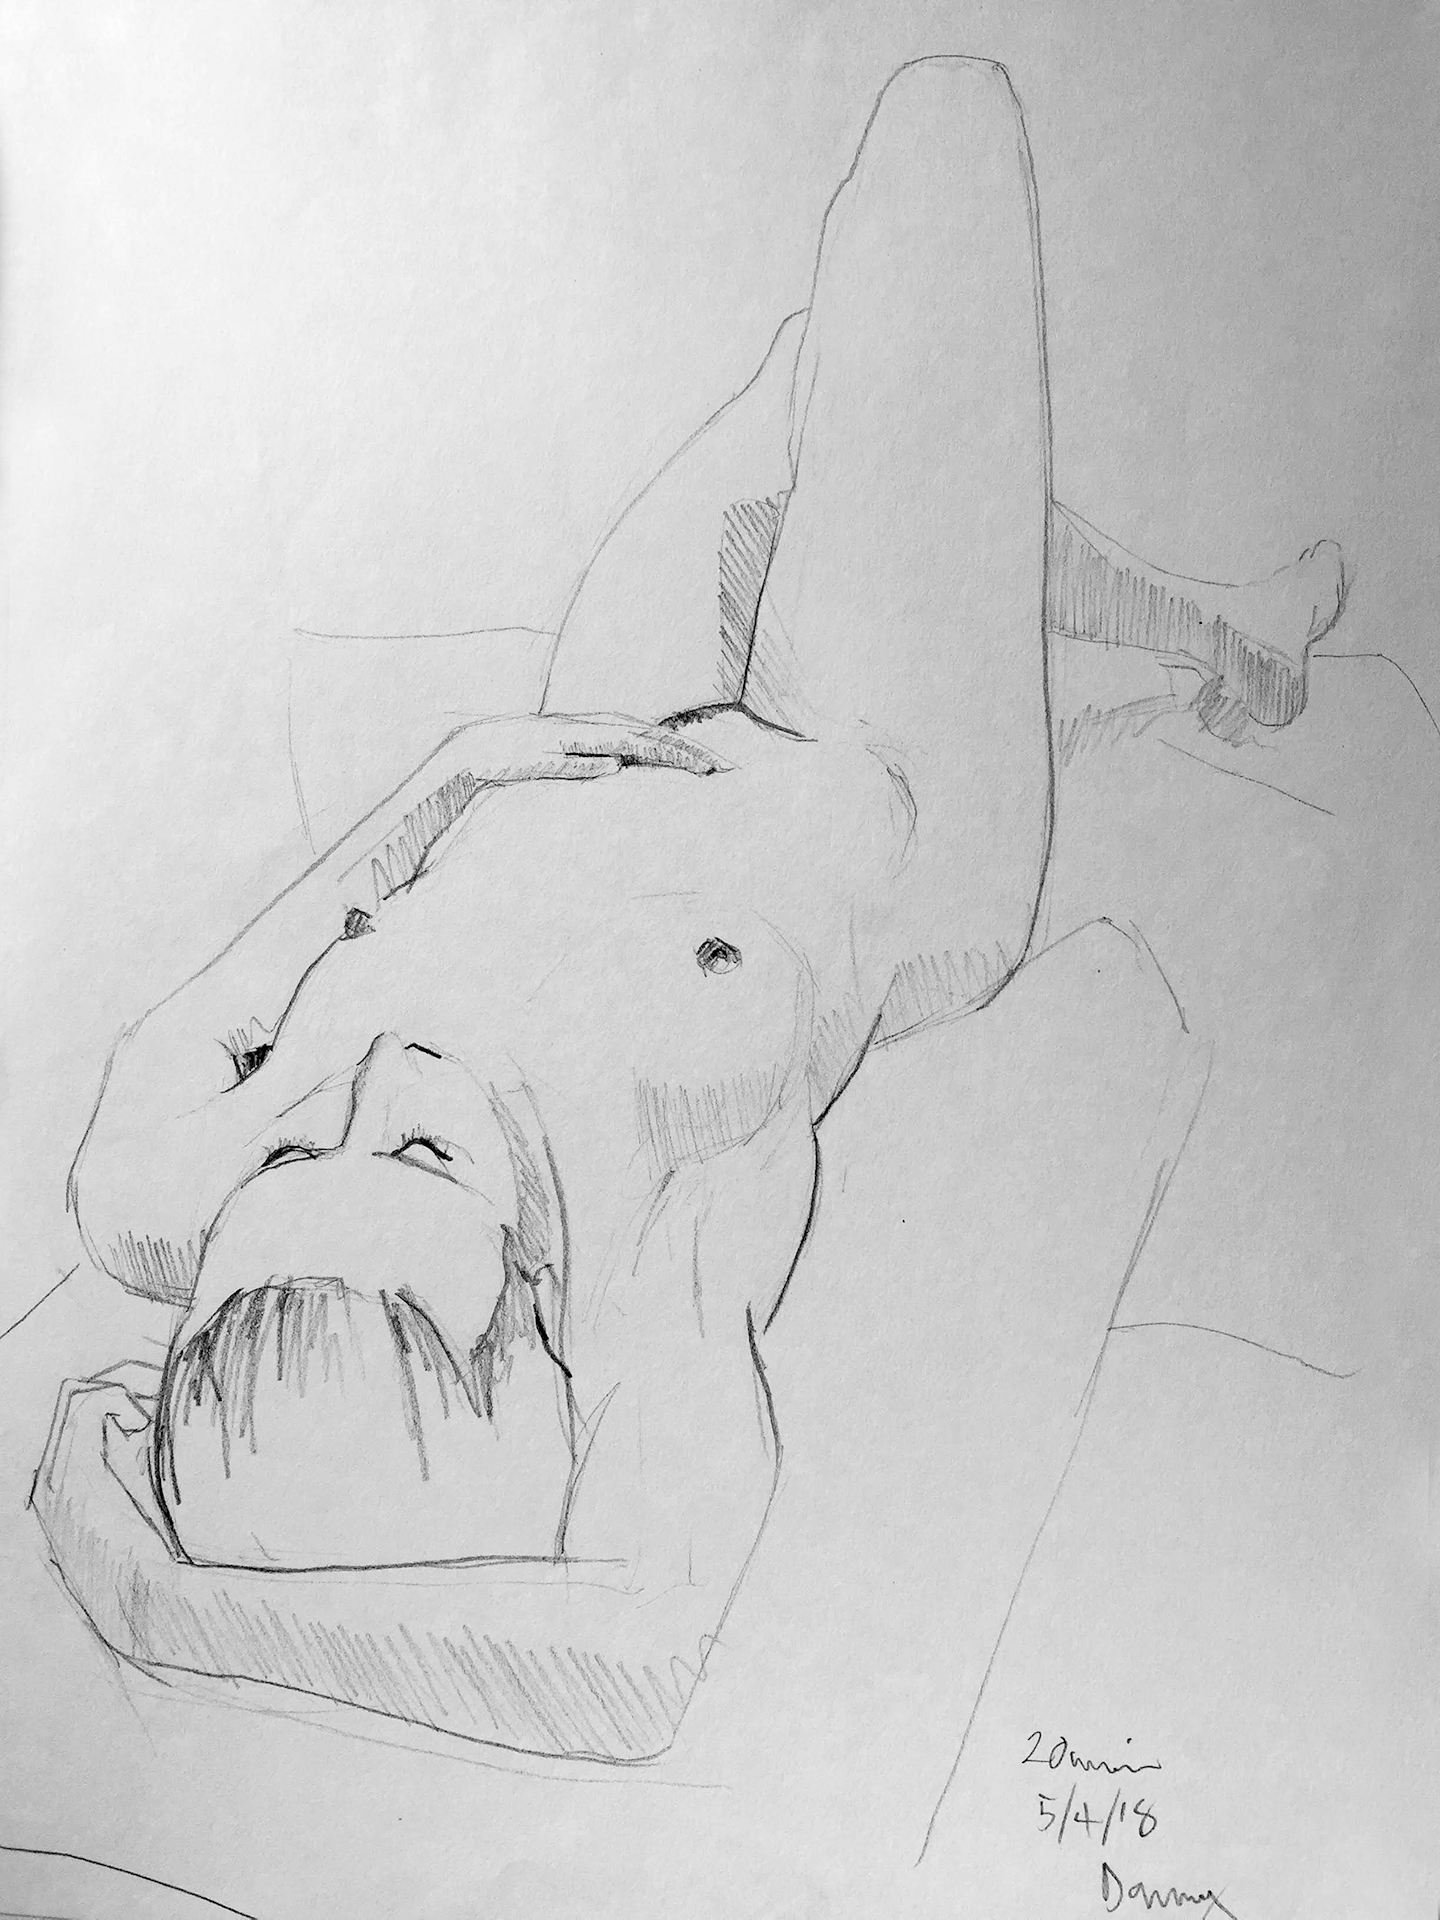 Life Drawing Sketch 1 Session 5/4/18